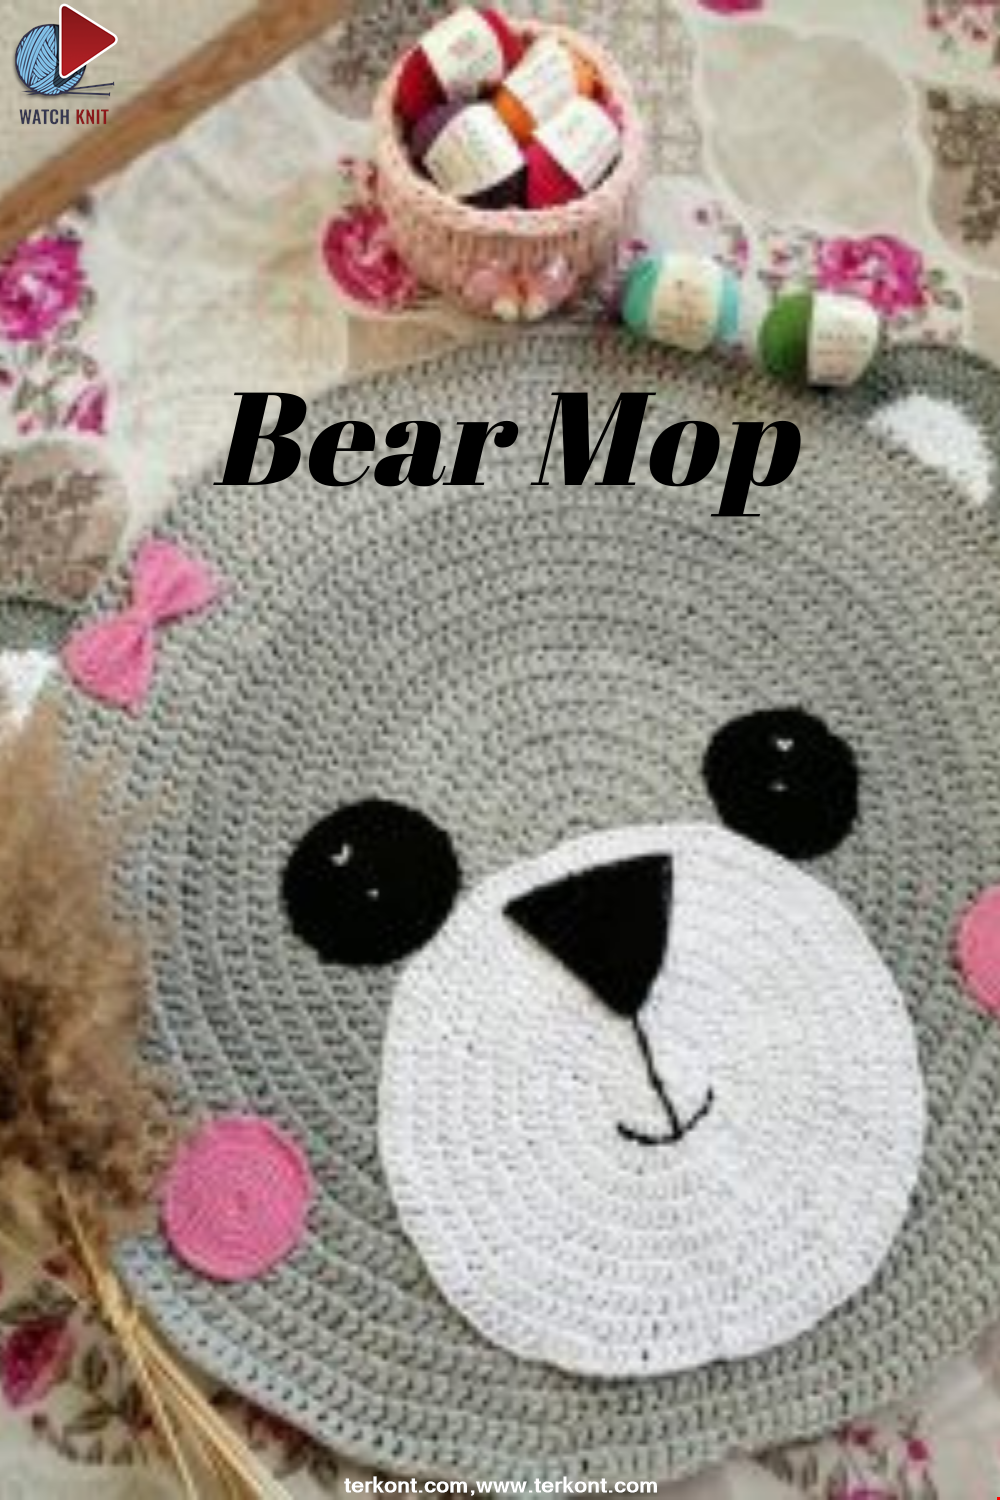 Sweet Teddy Bear Mop Making and Recipe for Your Home